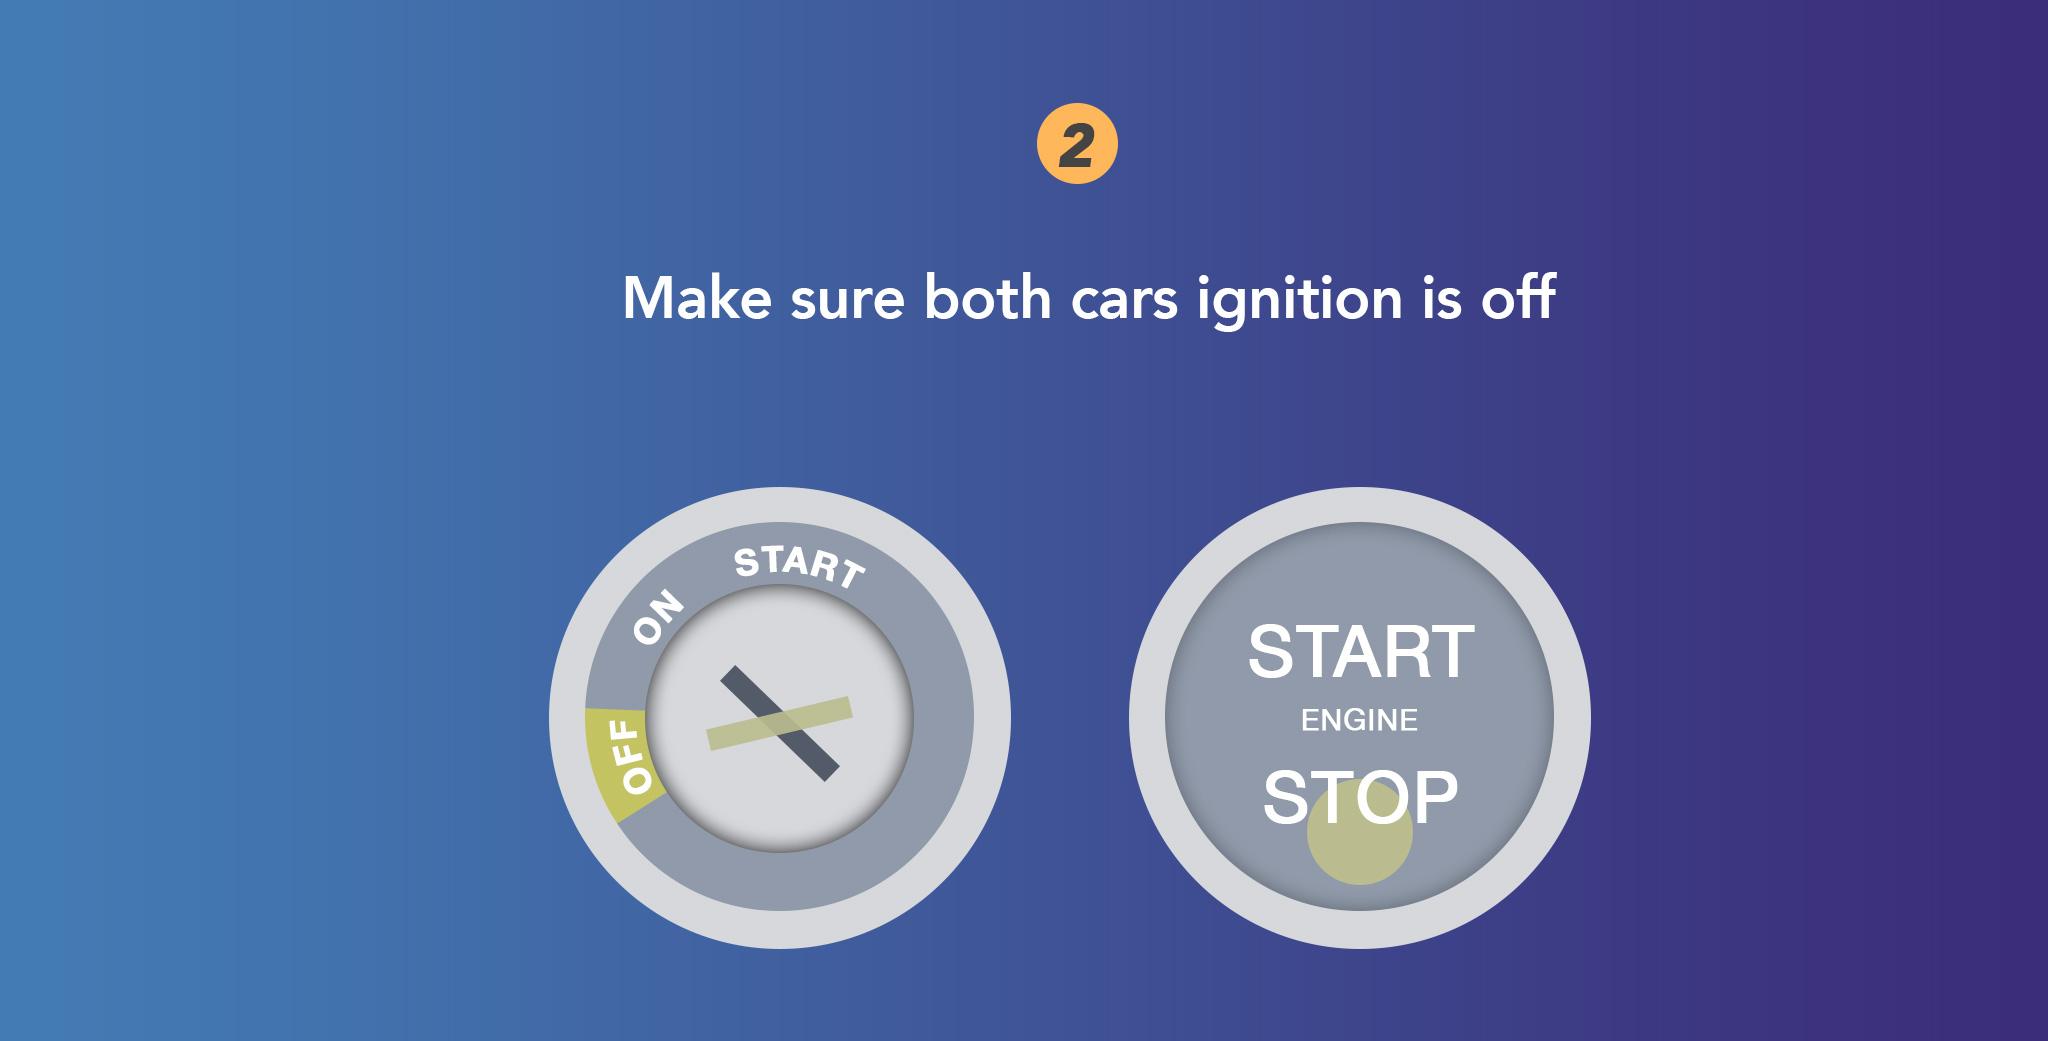 Make sure both cars ignition is off